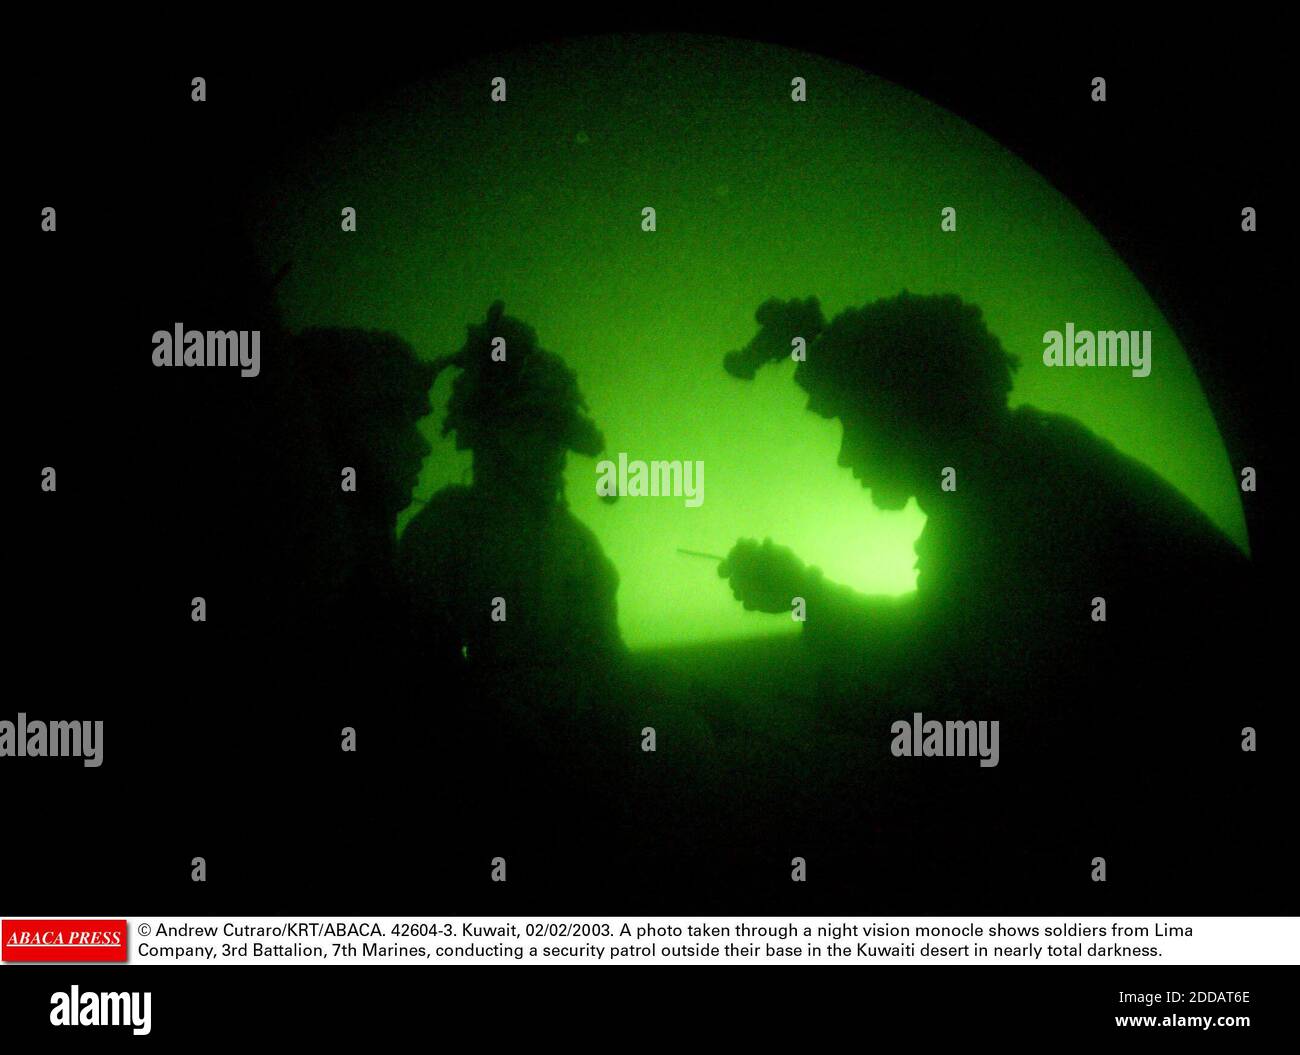 NO FILM, NO VIDEO, NO TV, NO DOCUMENTARY - © Andrew Cutraro/KRT/ABACA. 42604-3. Kuwait, 02/02/2003. A photo taken through a night vision monocle shows soldiers from Lima Company, 3rd Battalion, 7th Marines, conducting a security patrol outside their base in the Kuwaiti desert in nearly total darkn Stock Photo